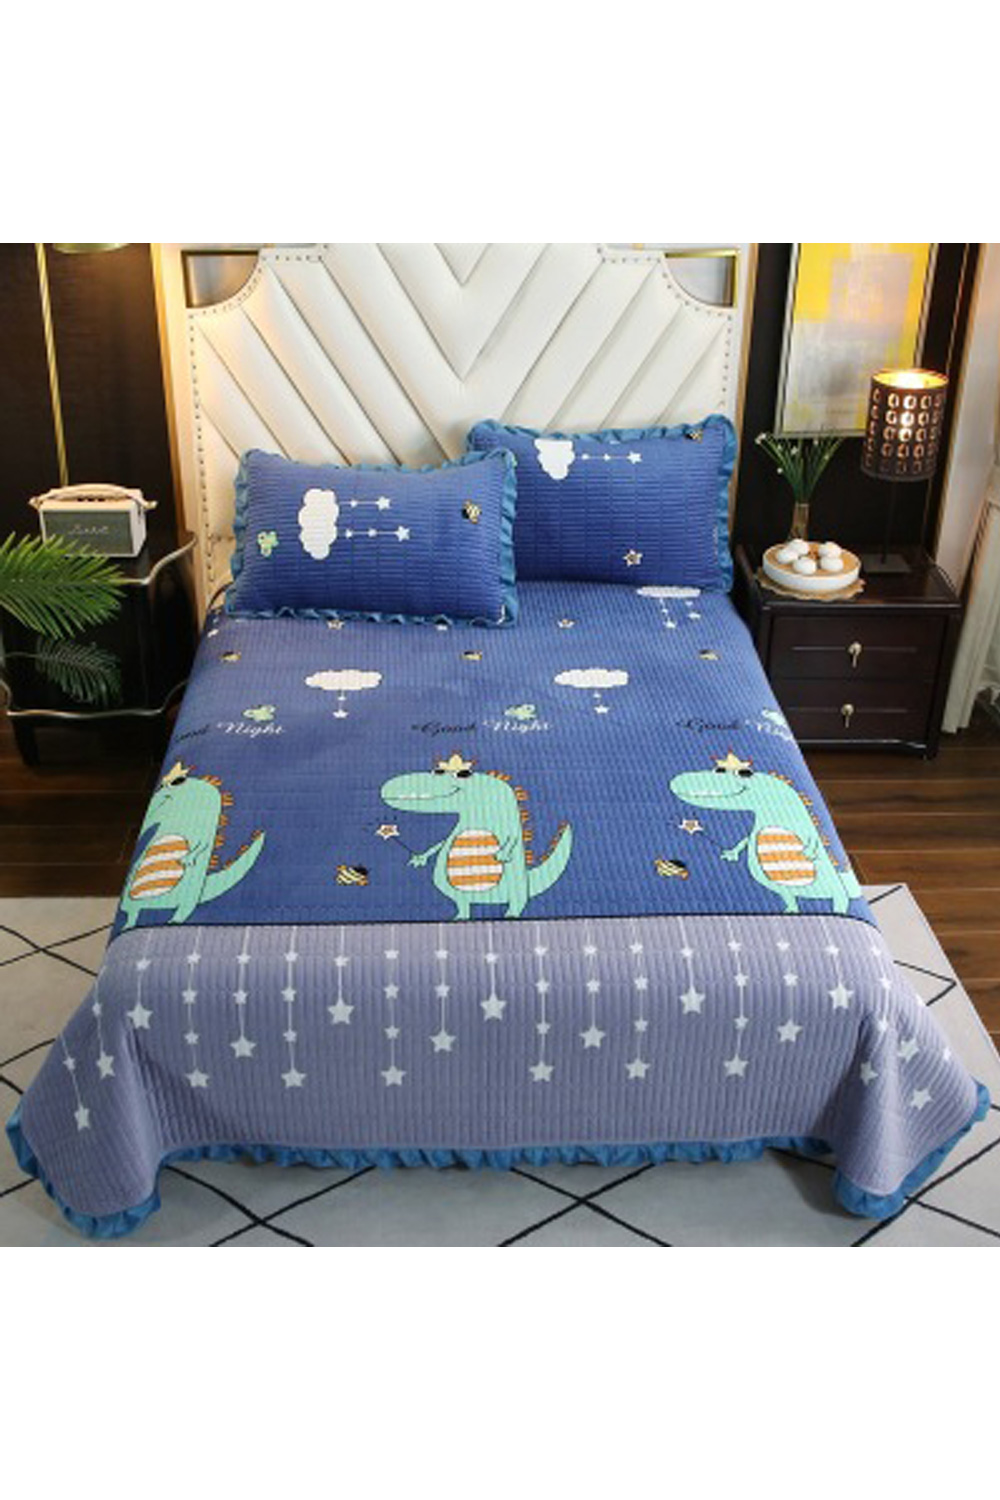 Jhon Peters Home Decor Pretty Cartoon Printed Bed Sheet With Pillow Covers